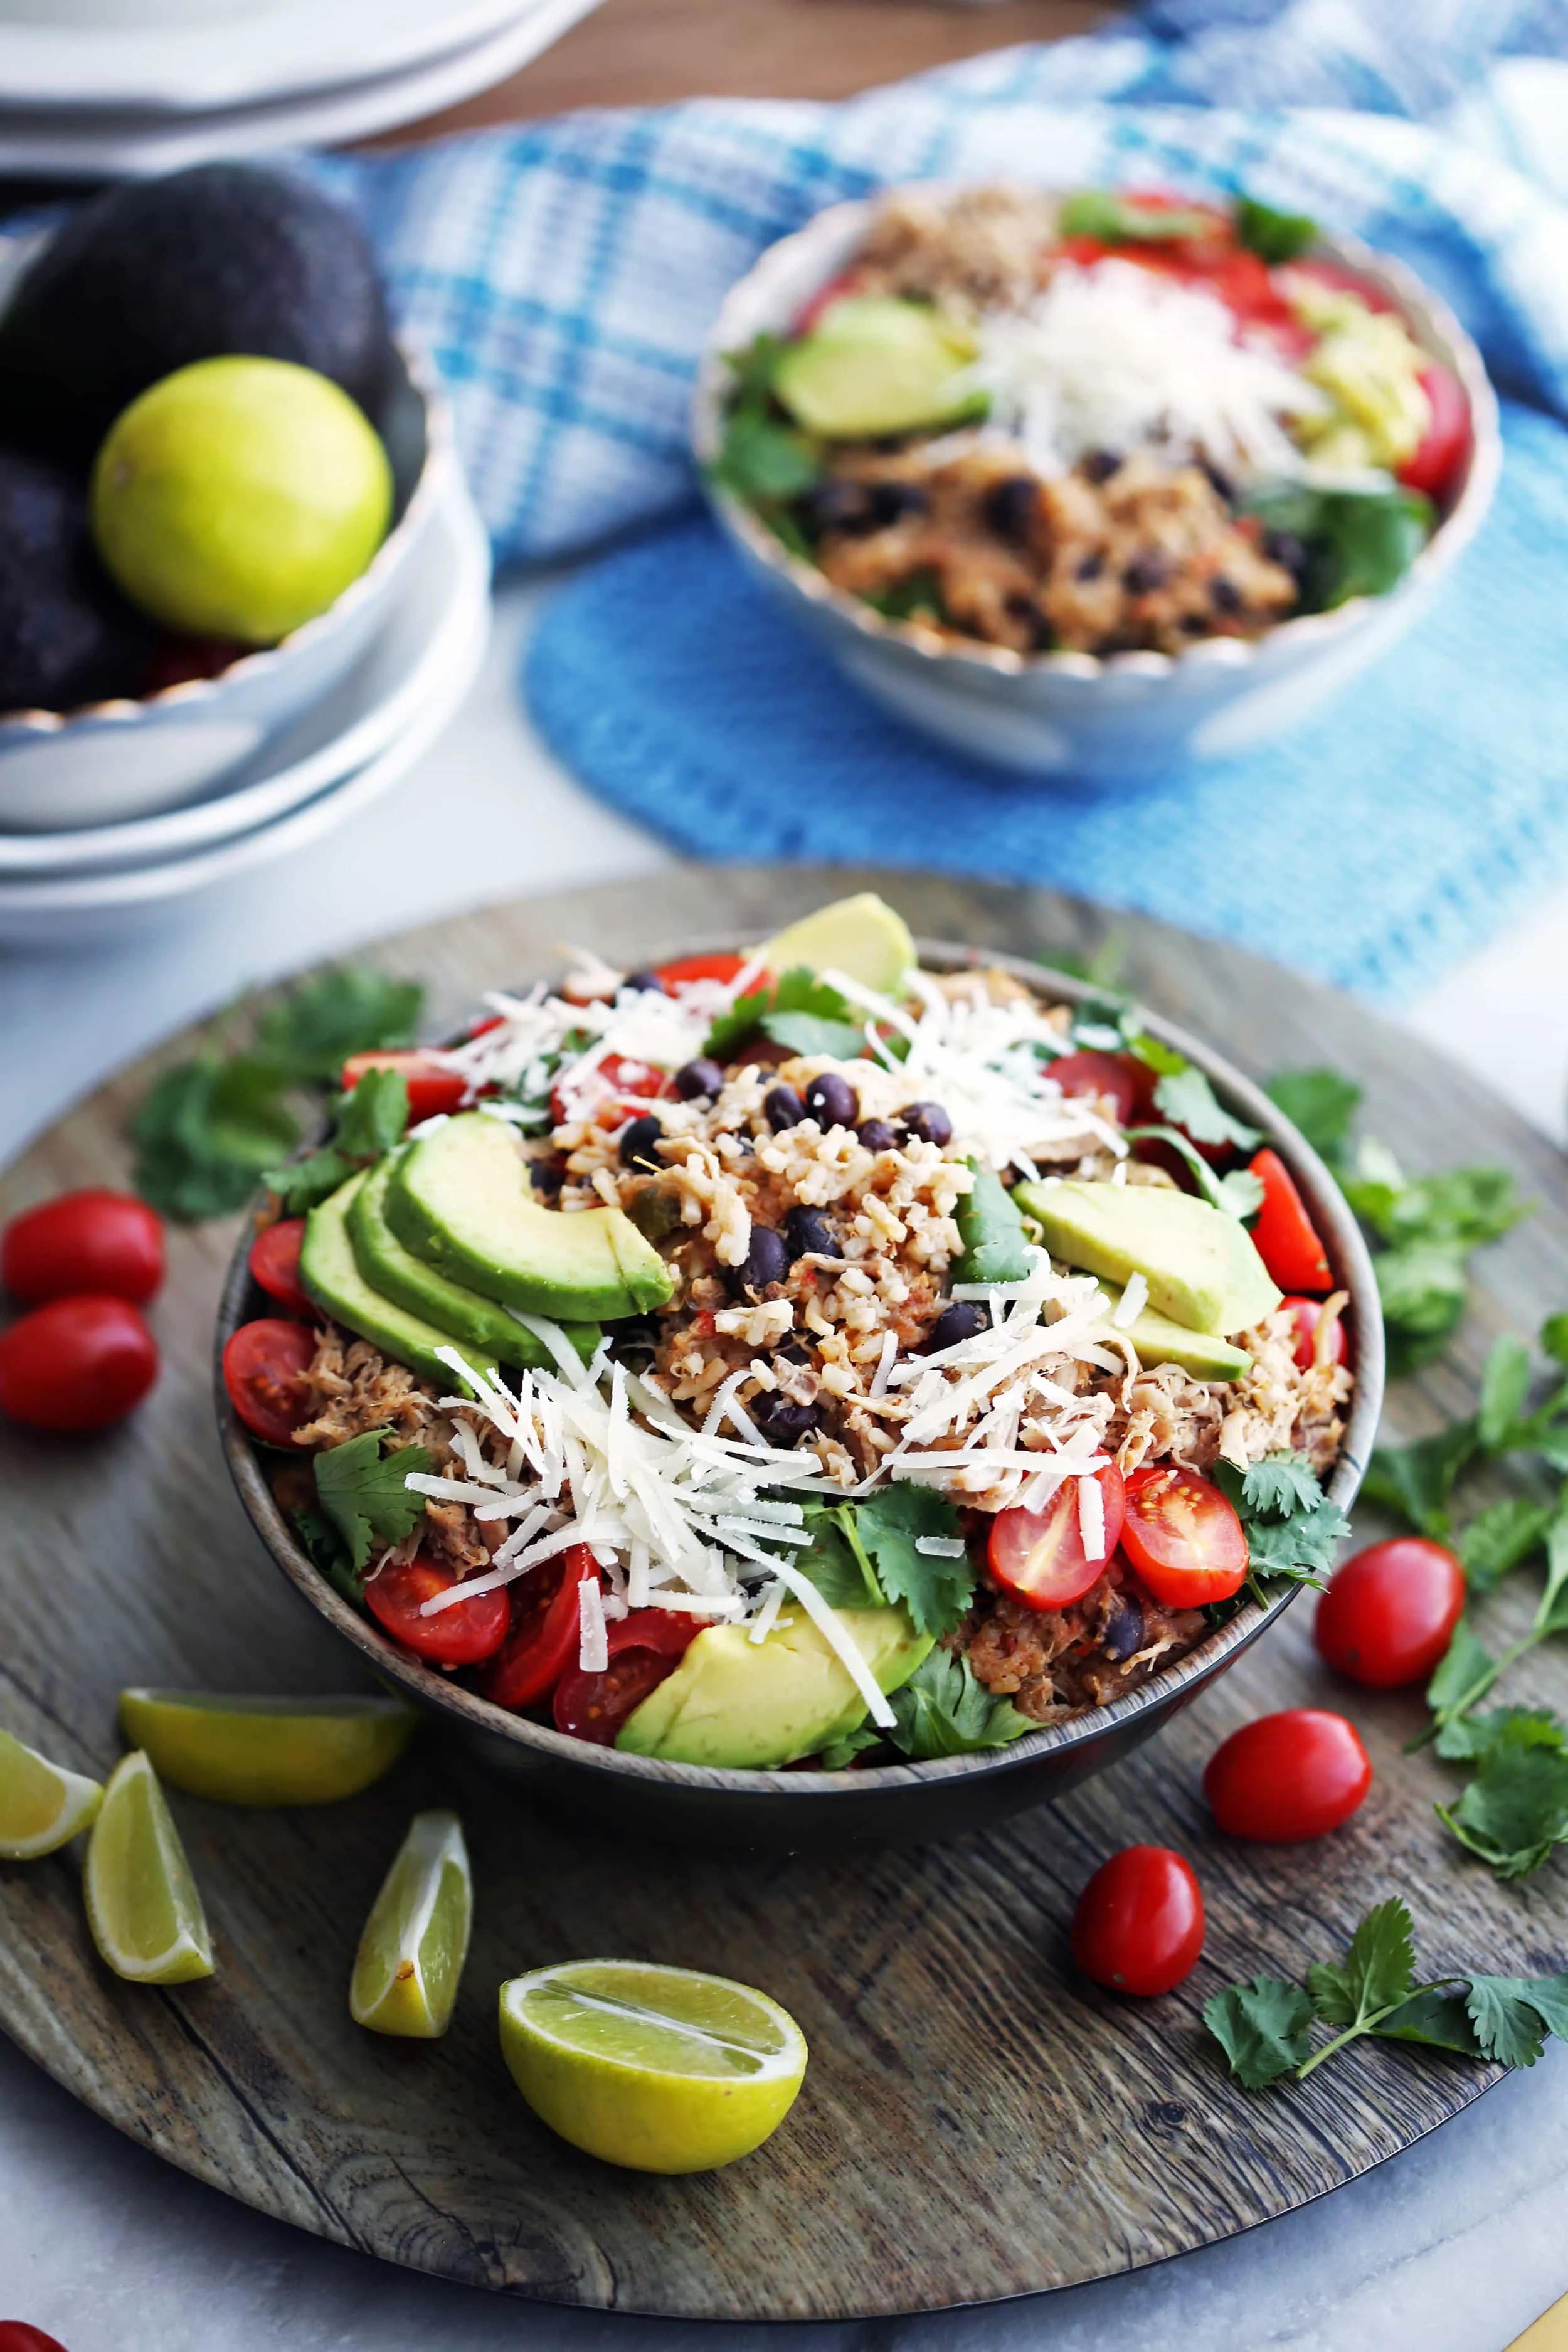 A full bowl of shredded chicken, black beans, and rice that's topped with avocado, cheese, tomatoes, and cilantro.